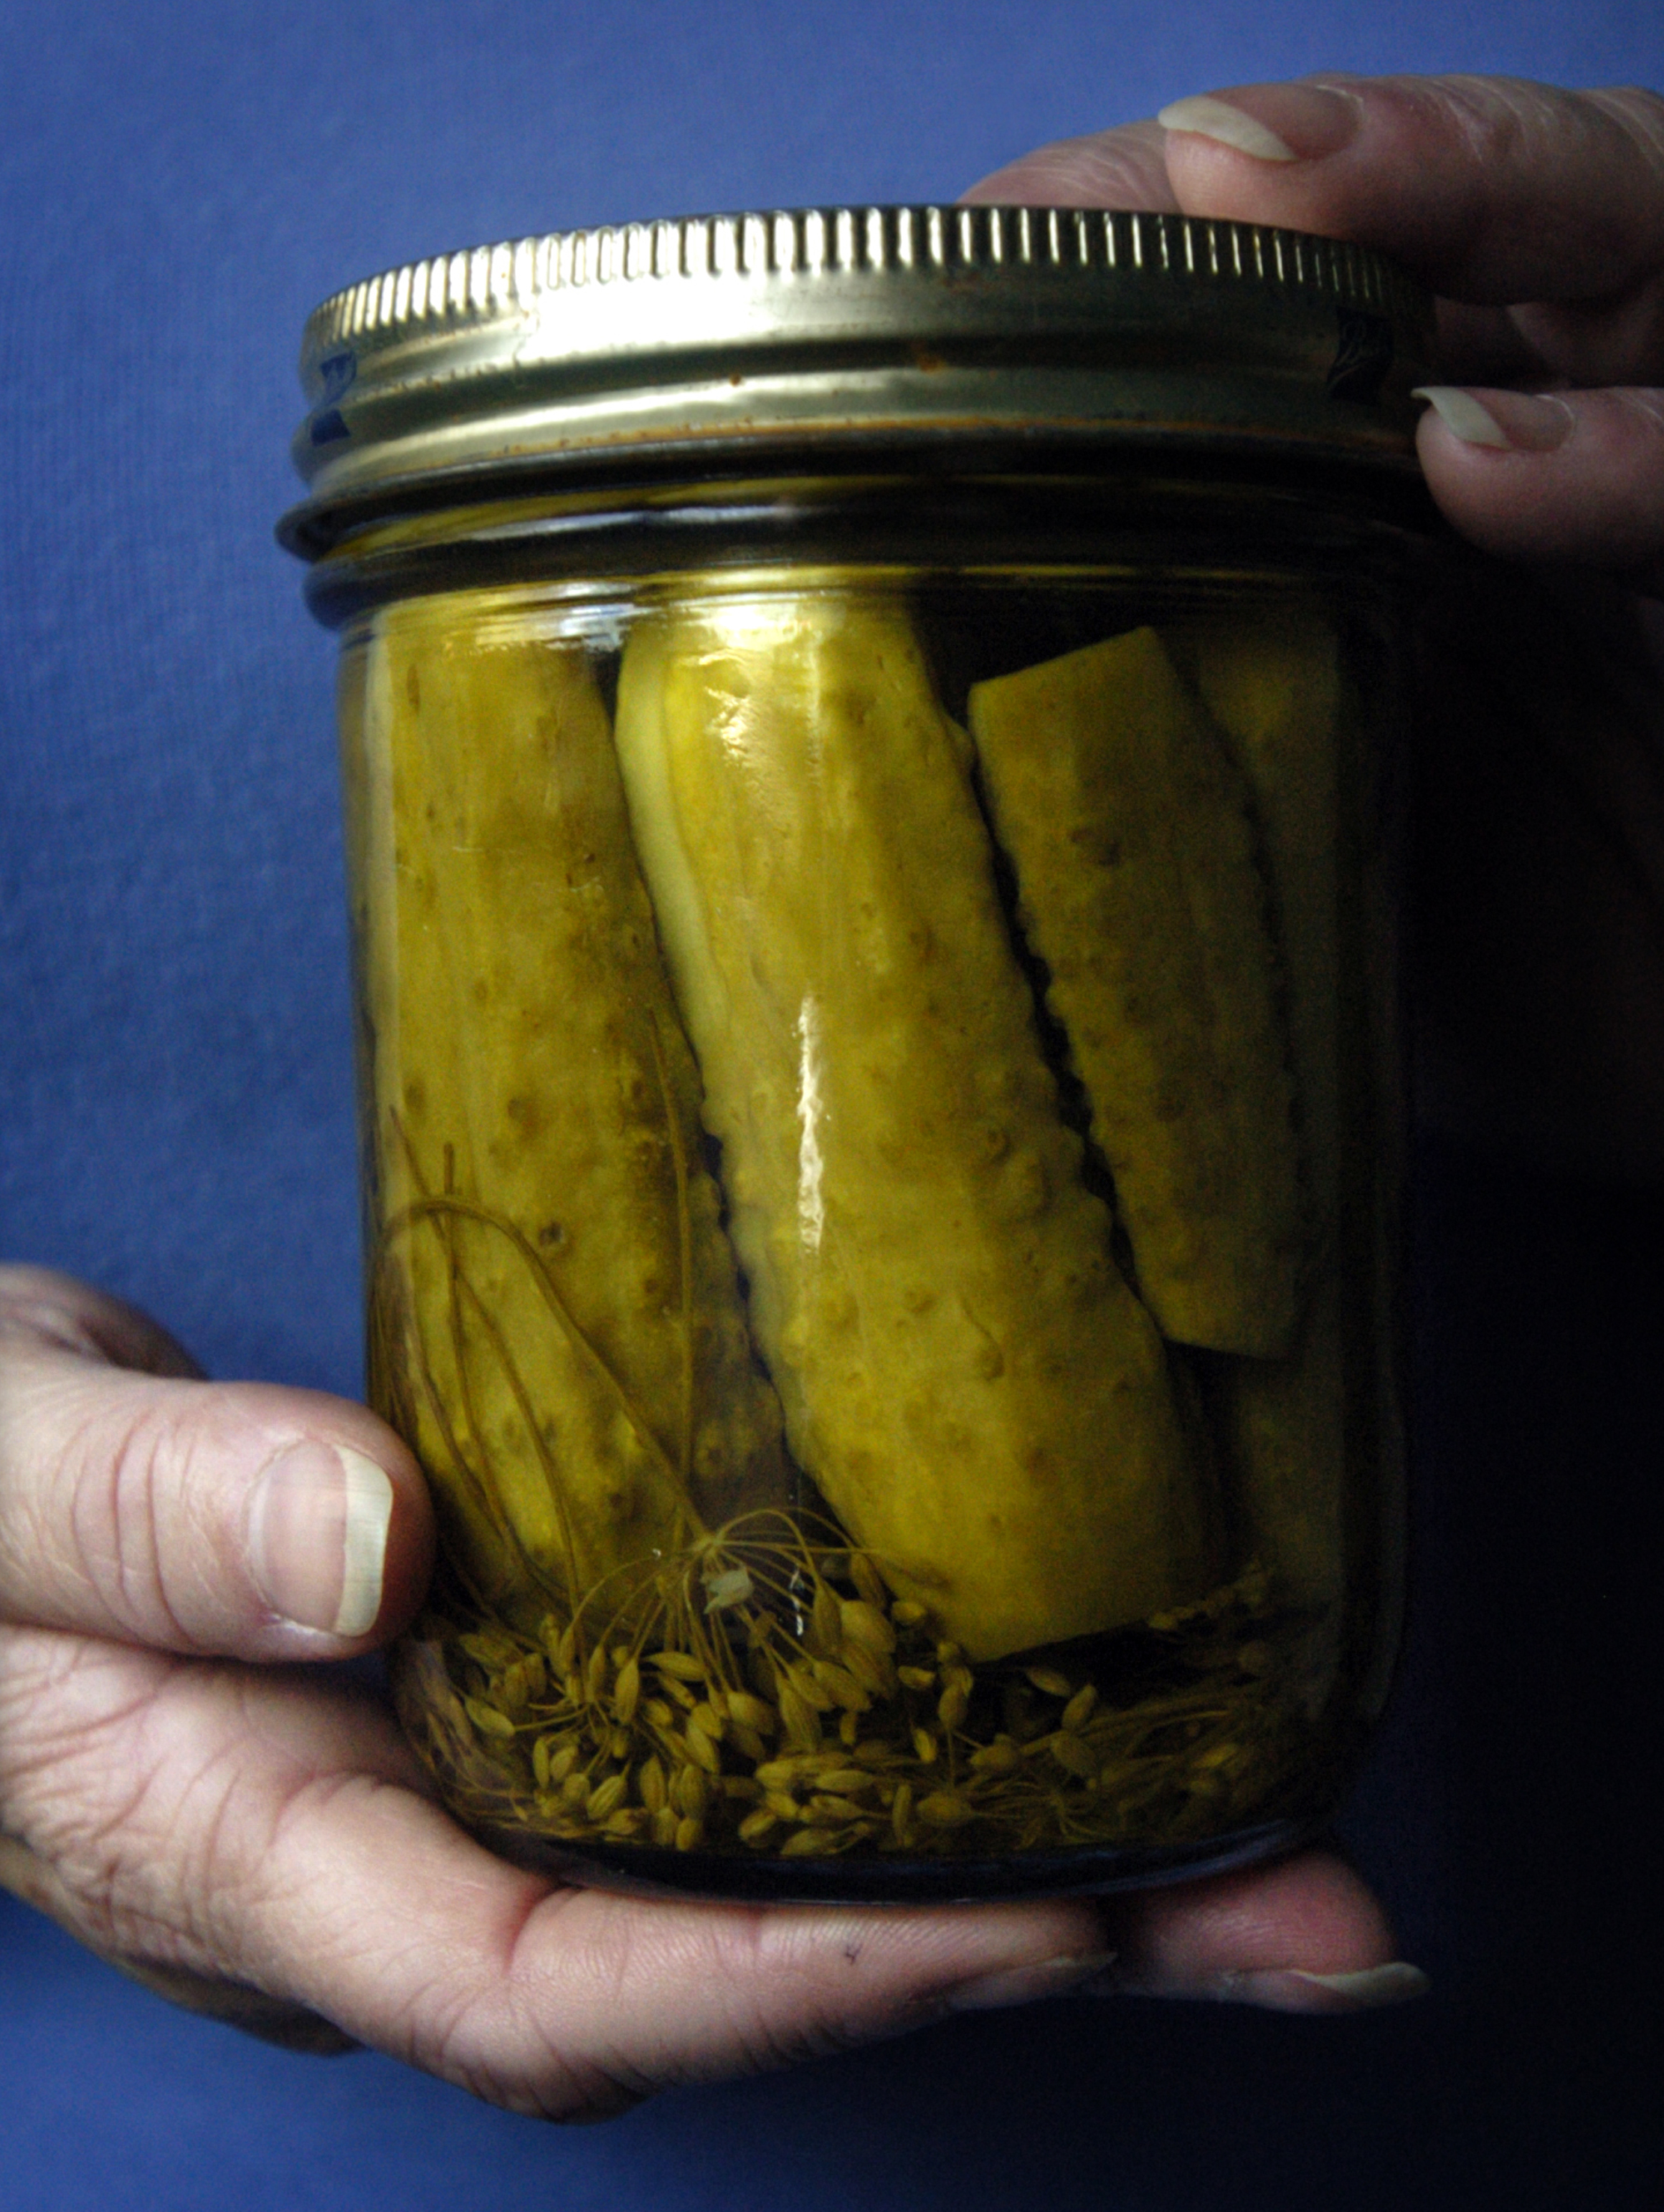 Ancient art of pickling | The Spokesman-Review